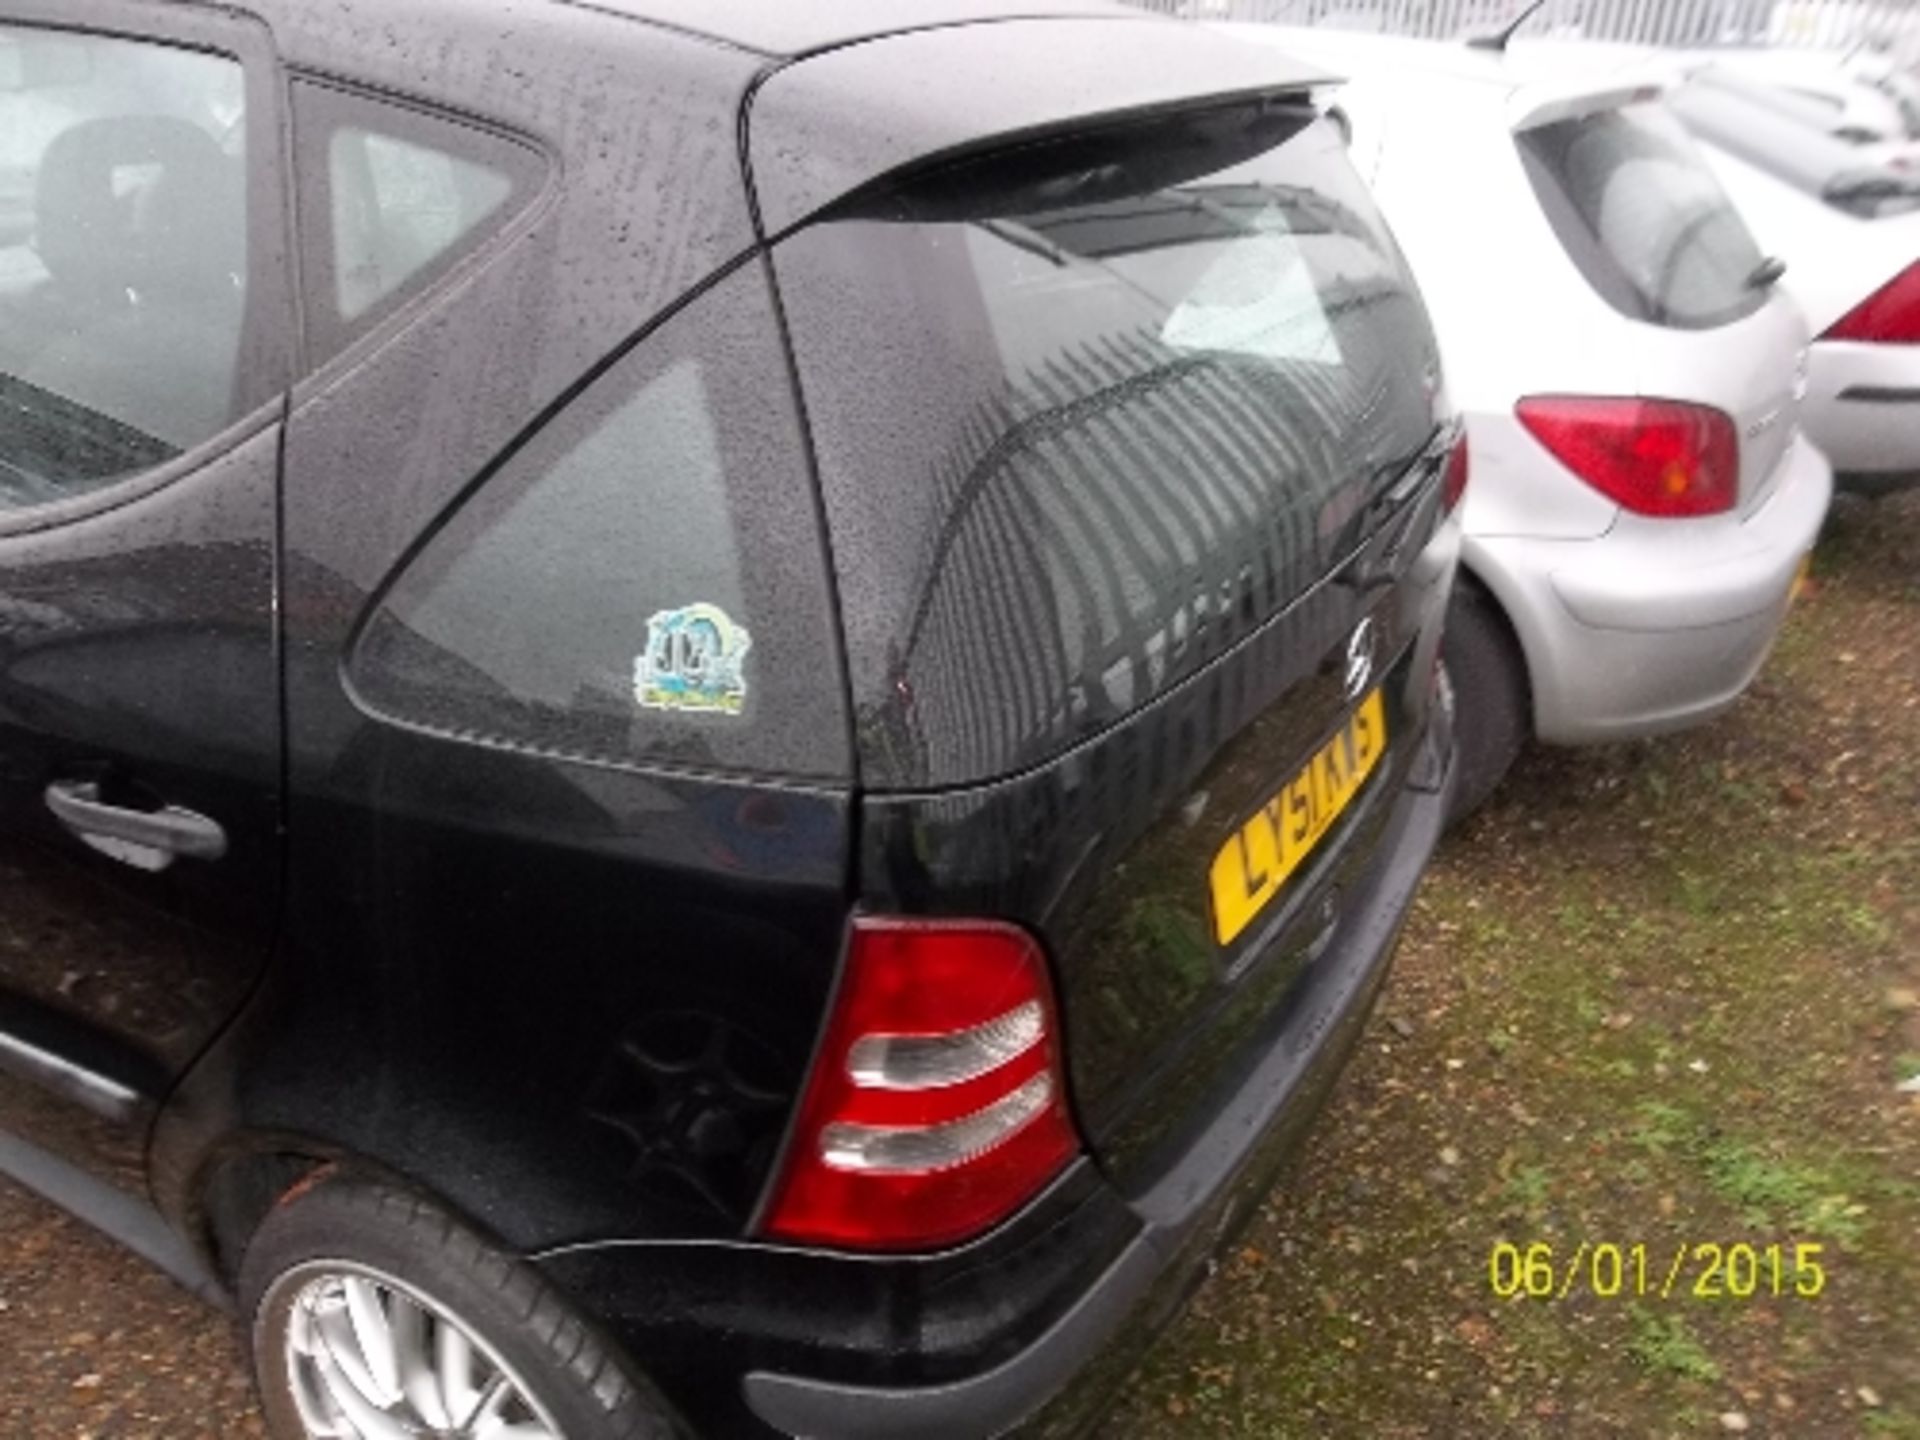 Mercedes A140 Classic - LY51 KWS Date of registration:  20.12.2001 1397cc, petrol, manual, black - Image 3 of 4